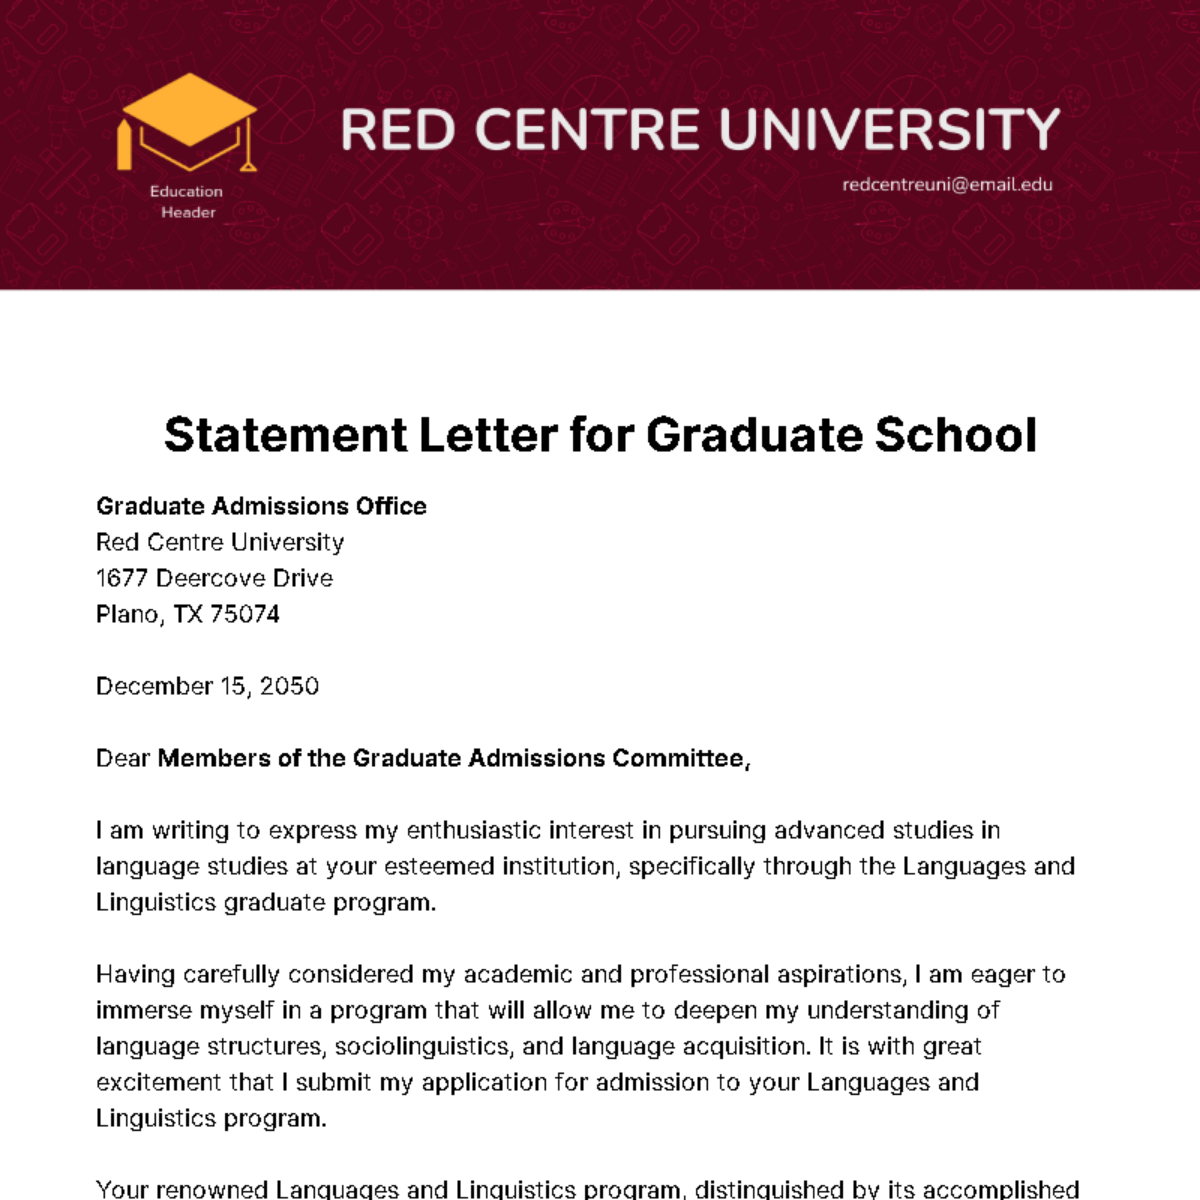 Statement Letter for Graduate School Template